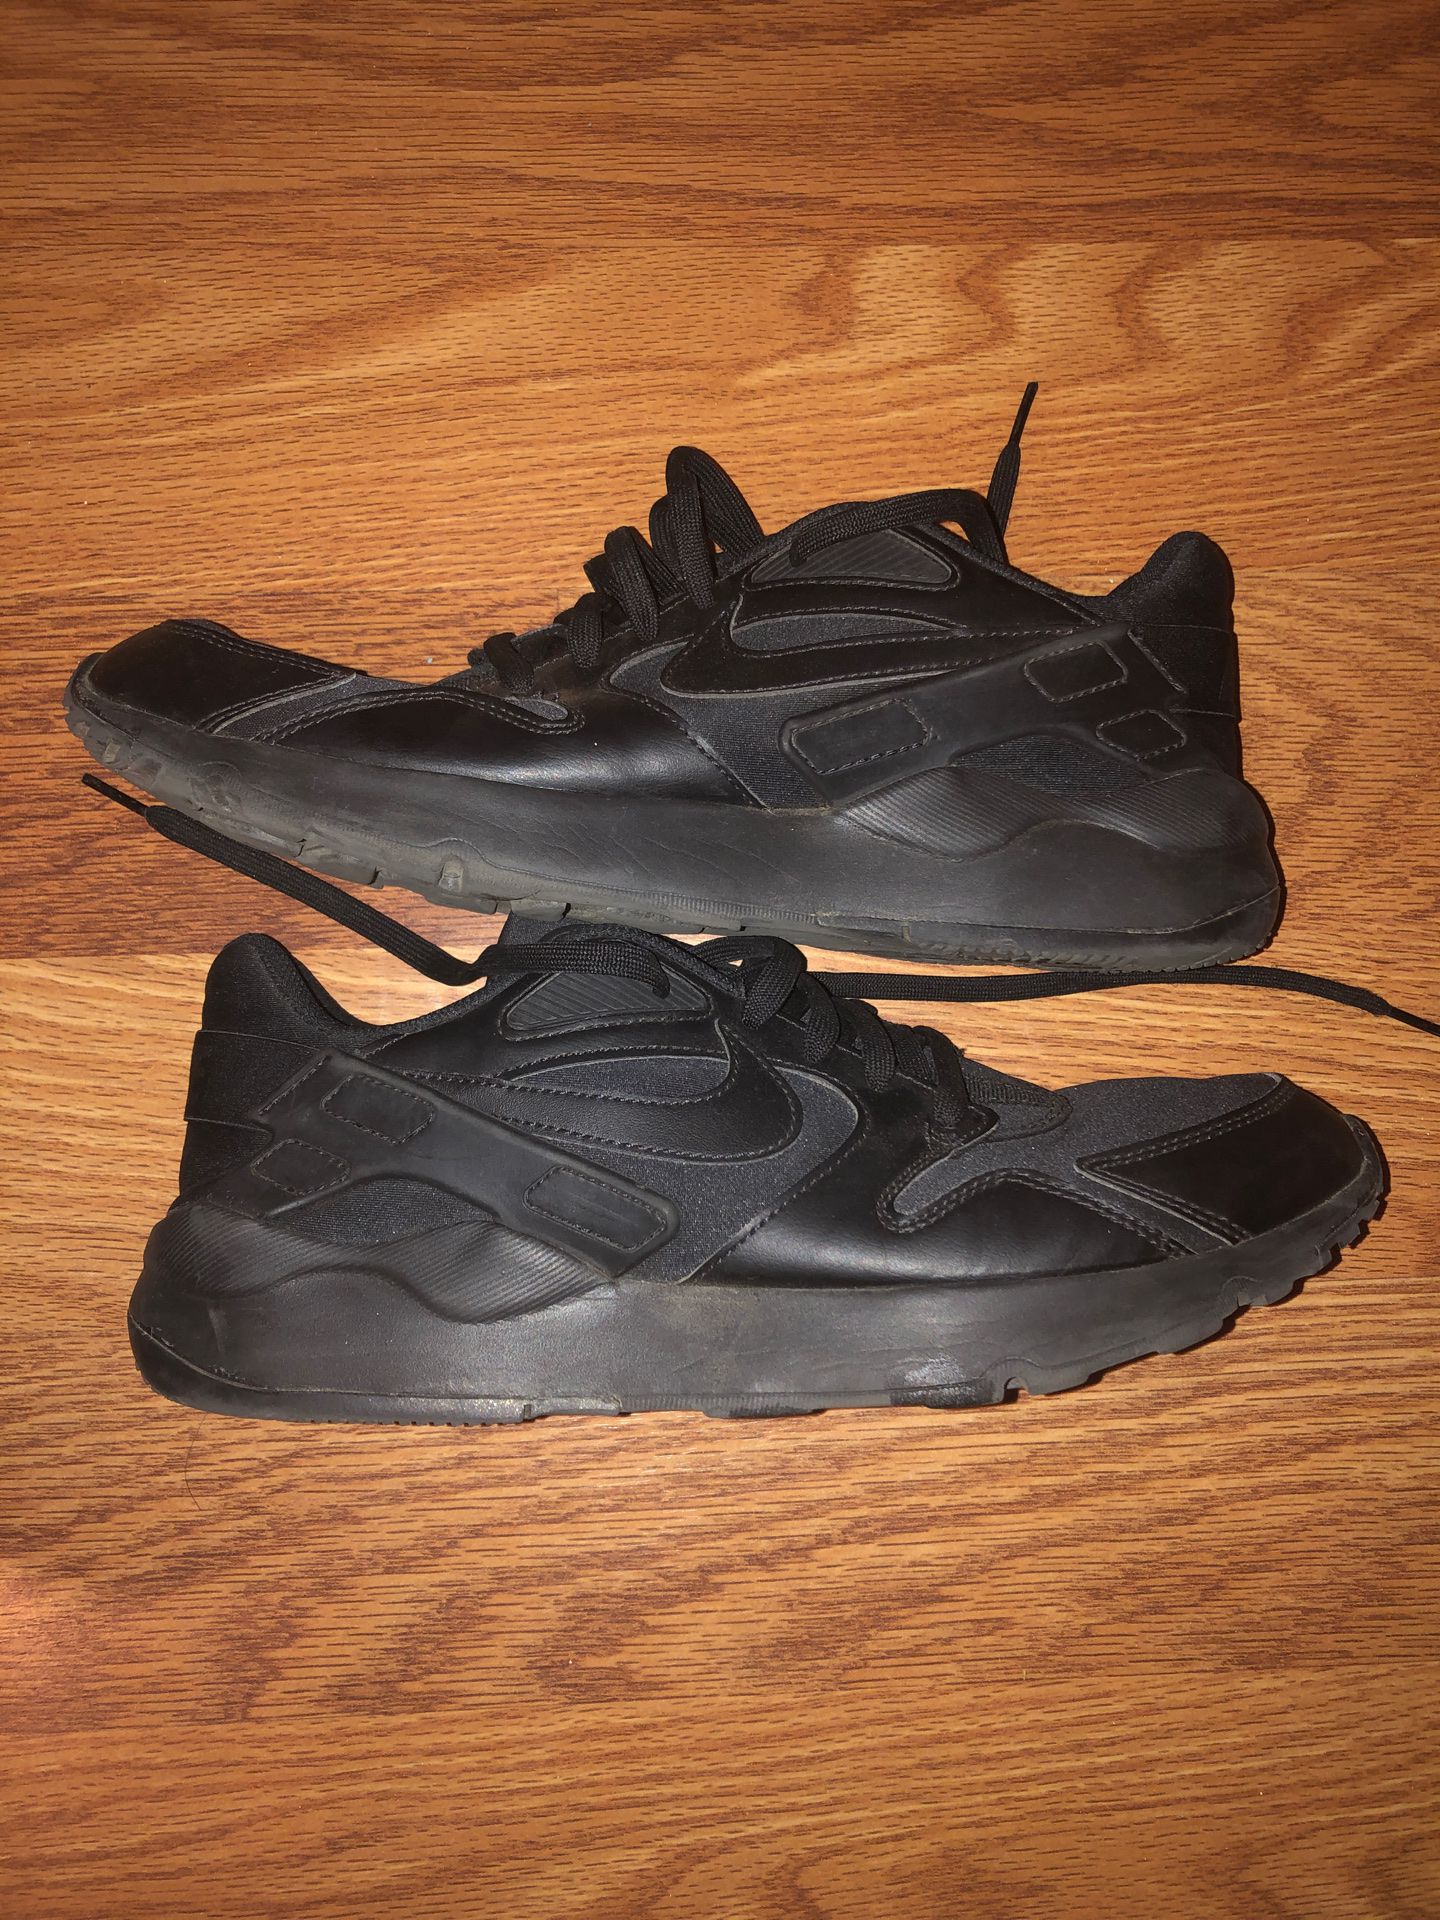 Size 11 Nike running shoes